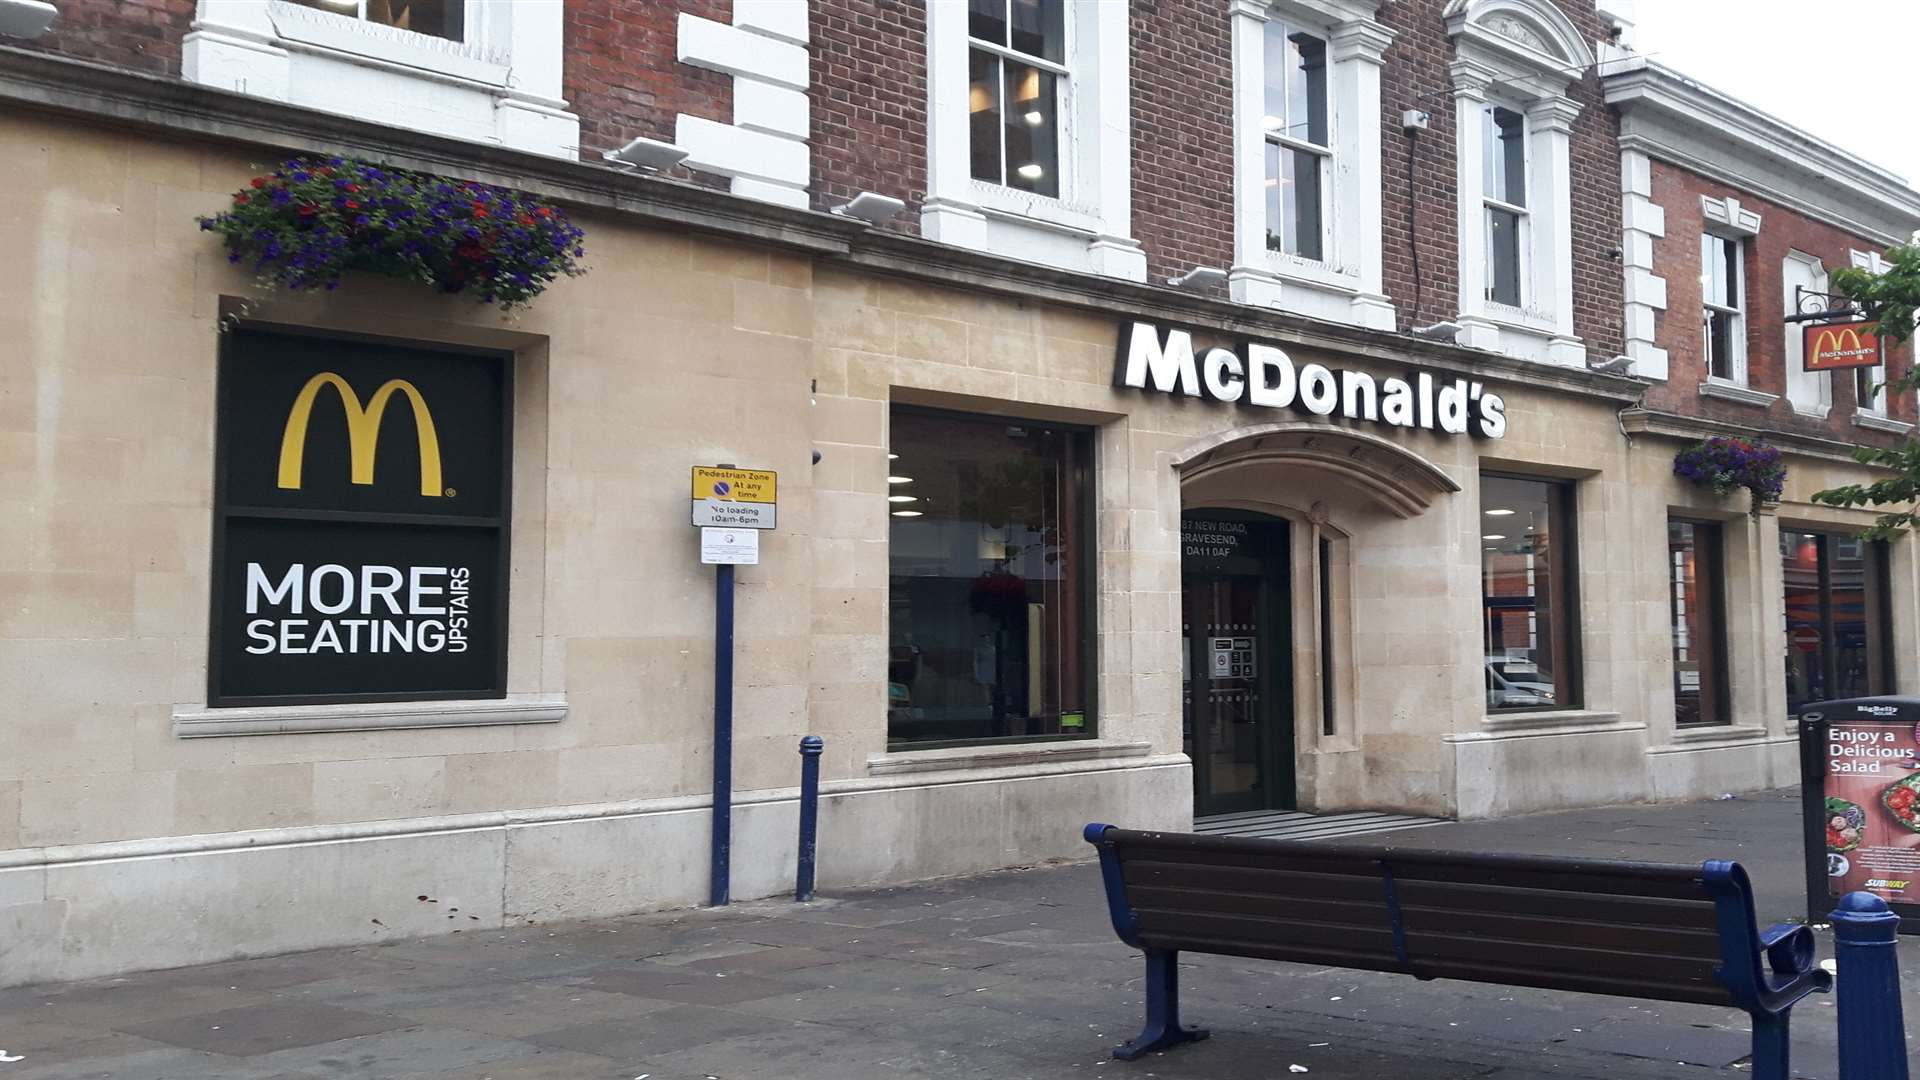 Oliver Horwood was employed at McDonald's in Gravesend